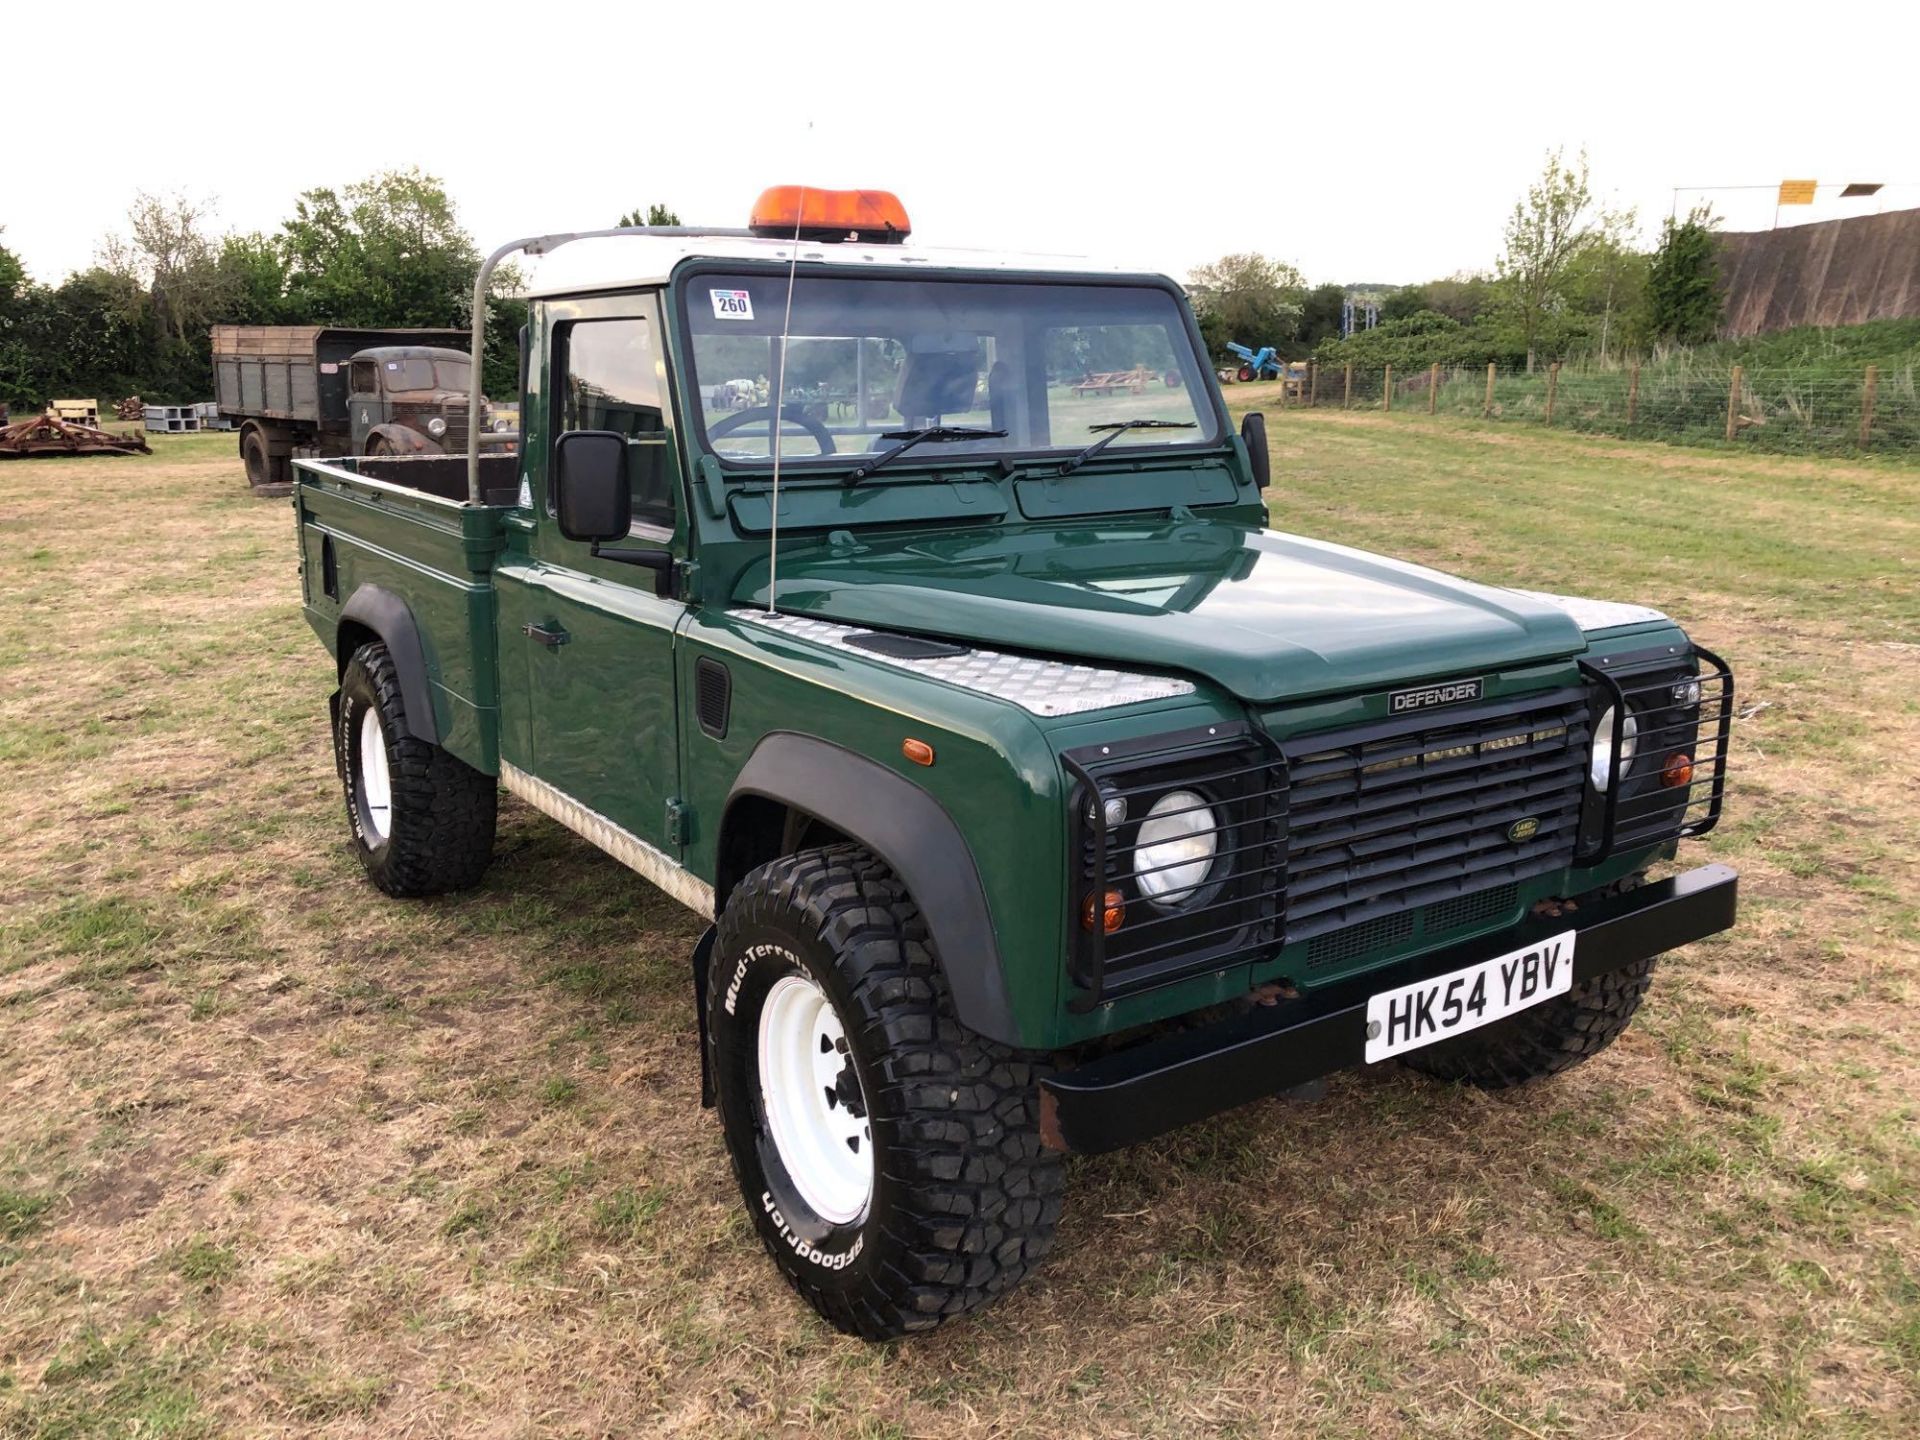 2004 Land Rover Defender 110 High-Capacity Pickup TD5, 4wd, manual, green, 2 door, with leather upho - Image 2 of 13